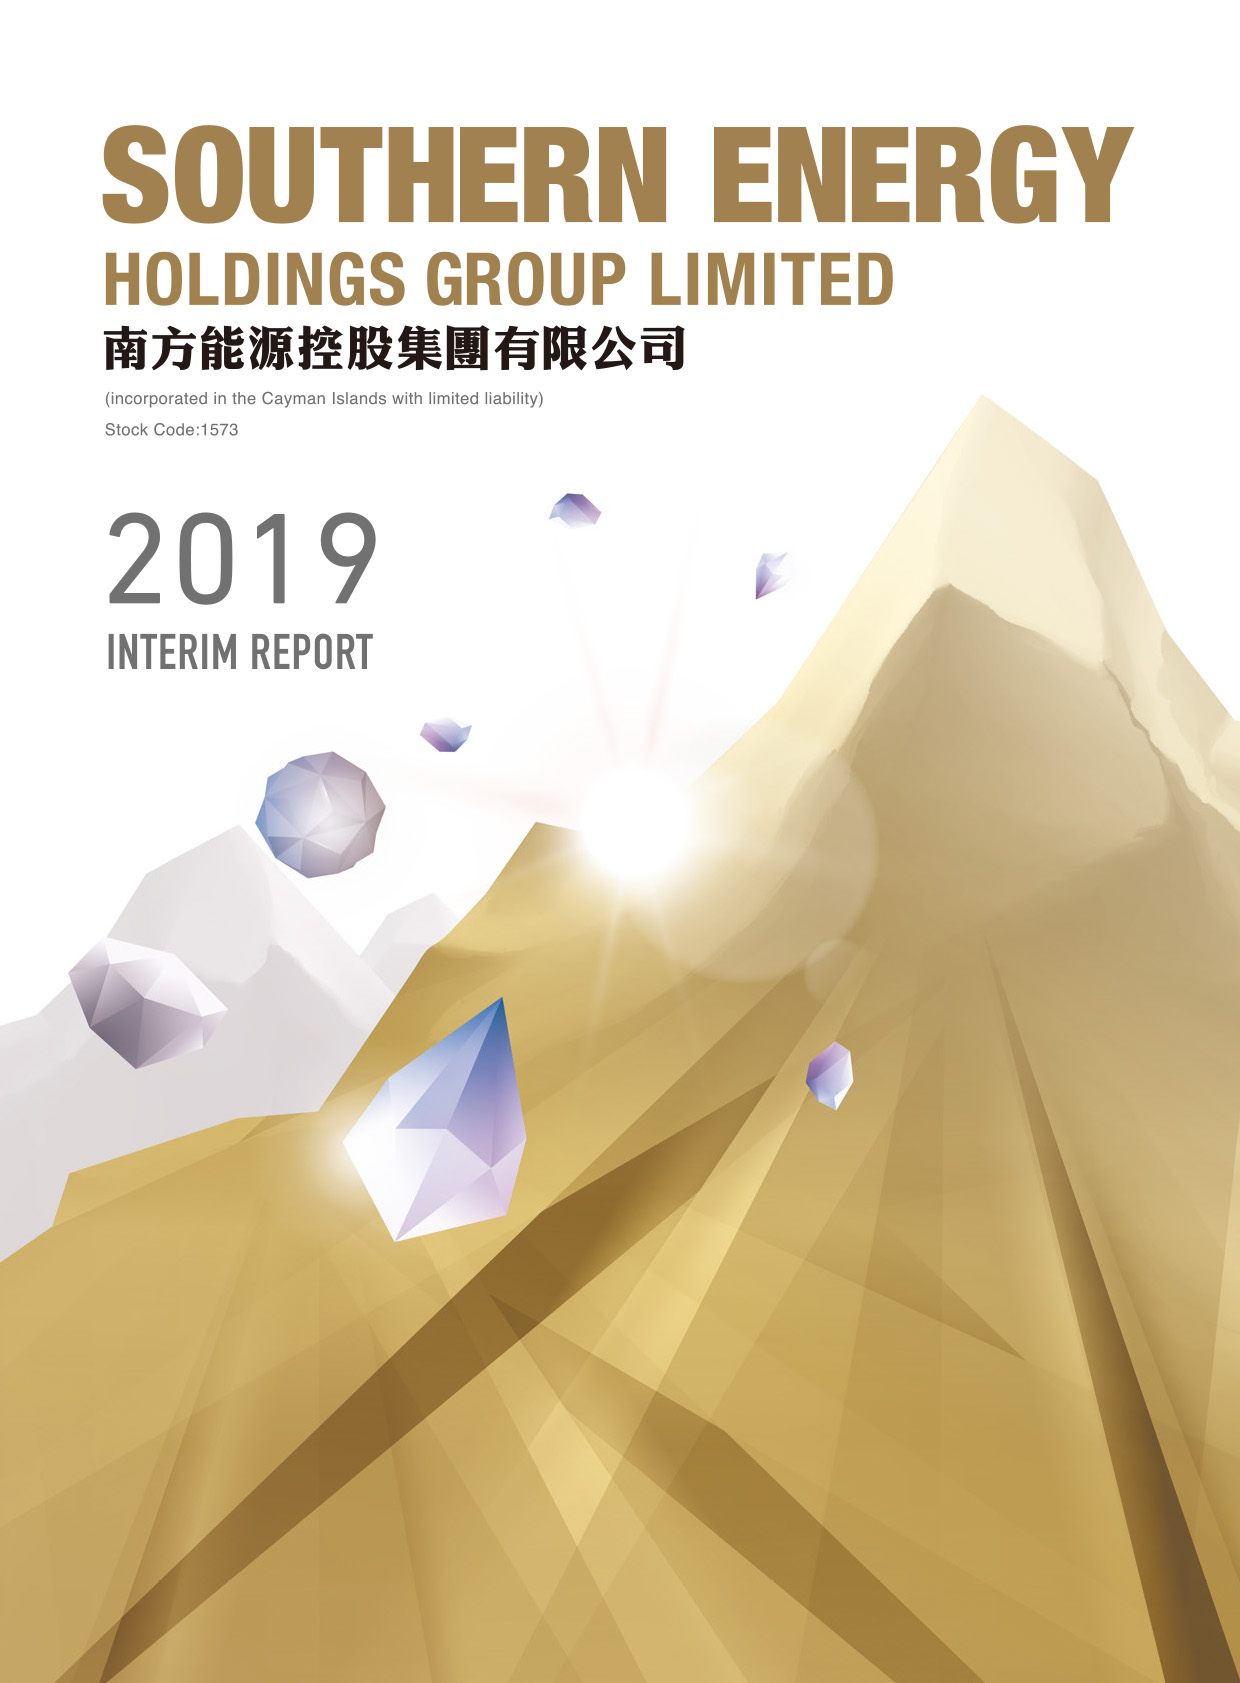 SOUTHERN ENERGY HOLDINGS GROUP LIMITED